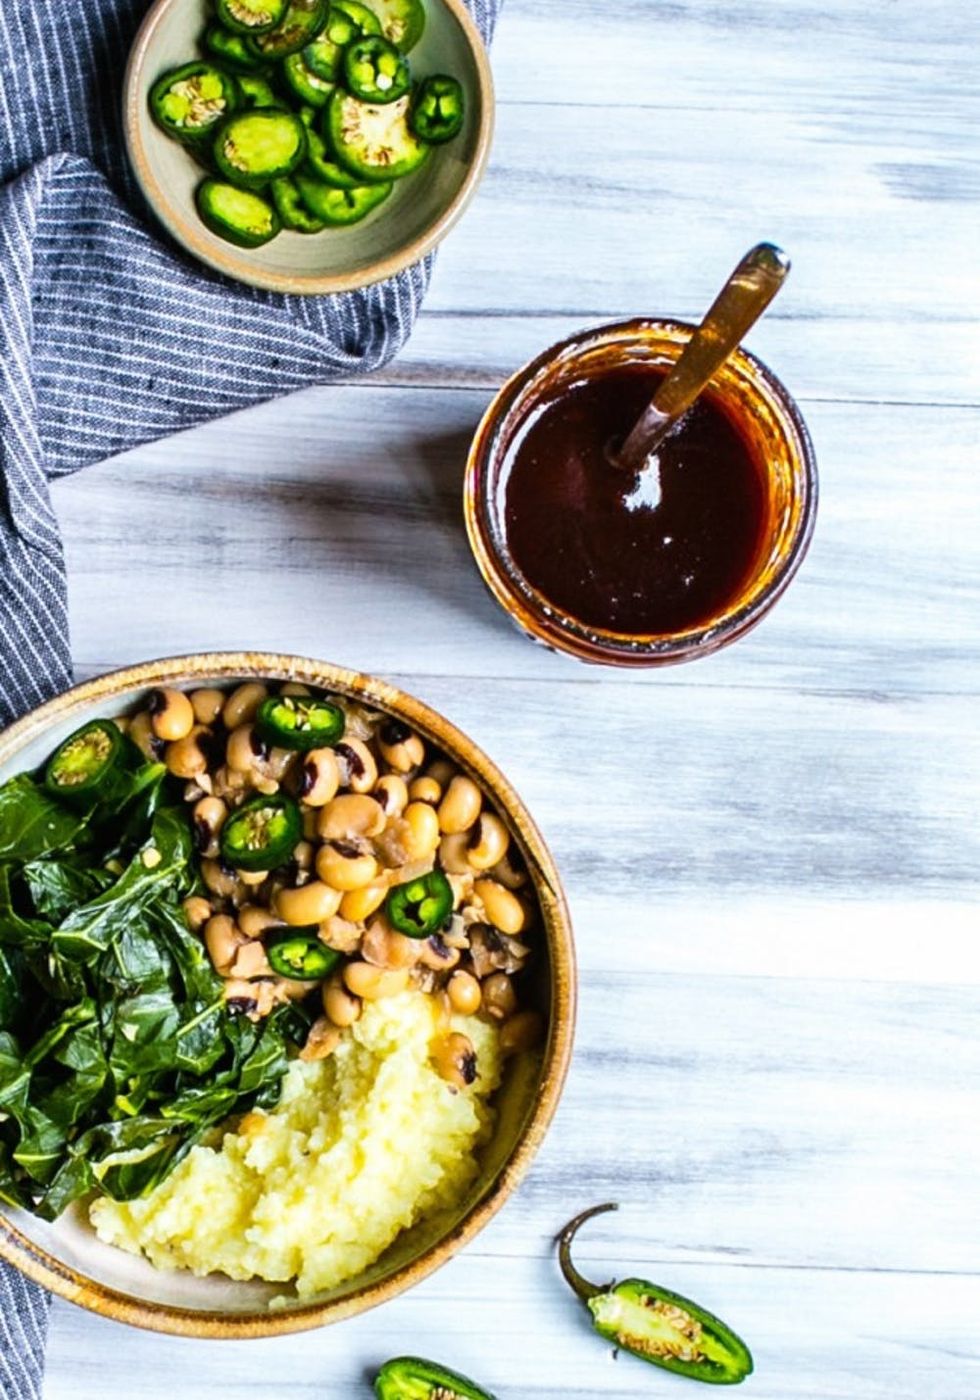 Black Eyed Peas With Smoky Collards and Cheesy Grits